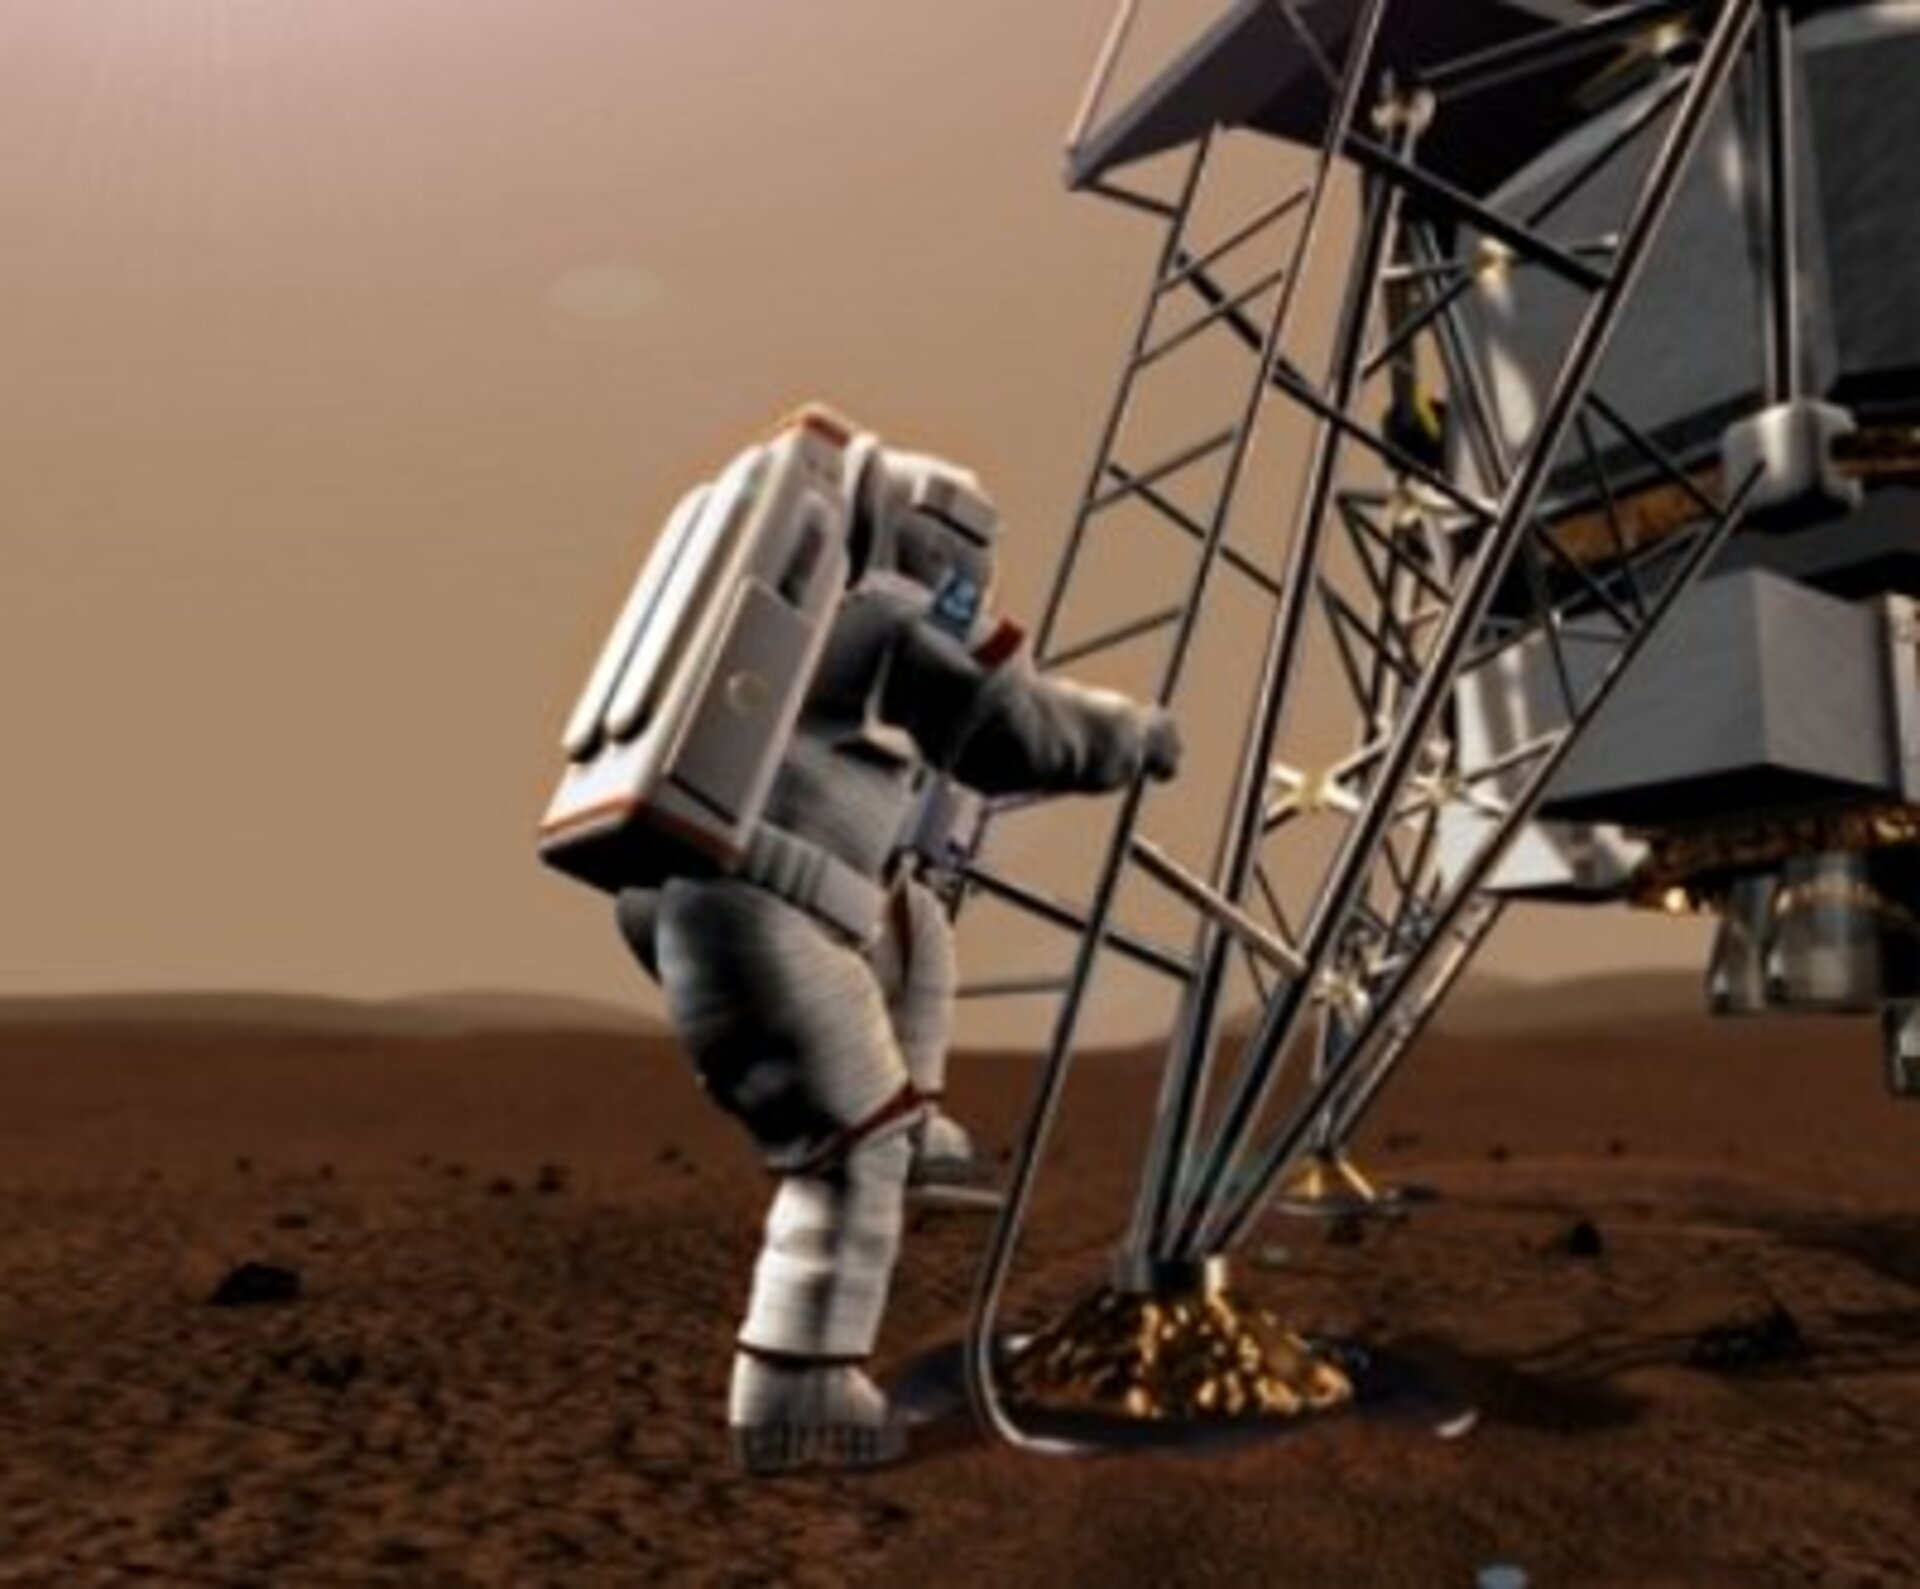 Preparing for a long-duration human mission to Mars